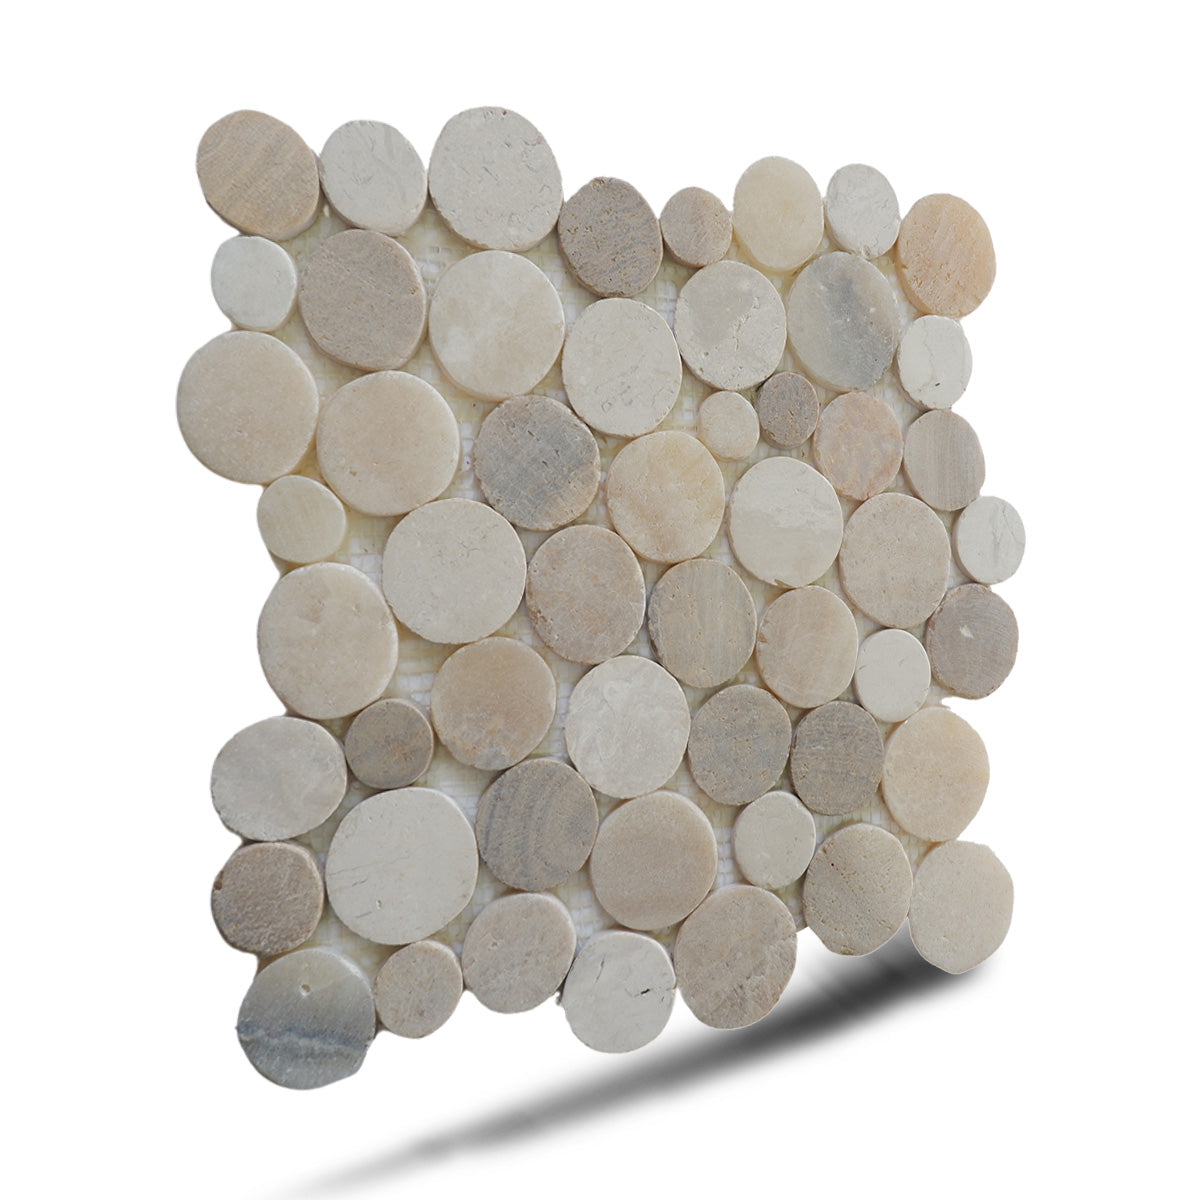 Sunset Penny Round Tile, Marble Onyx Mosaic Wall & Floor Tile